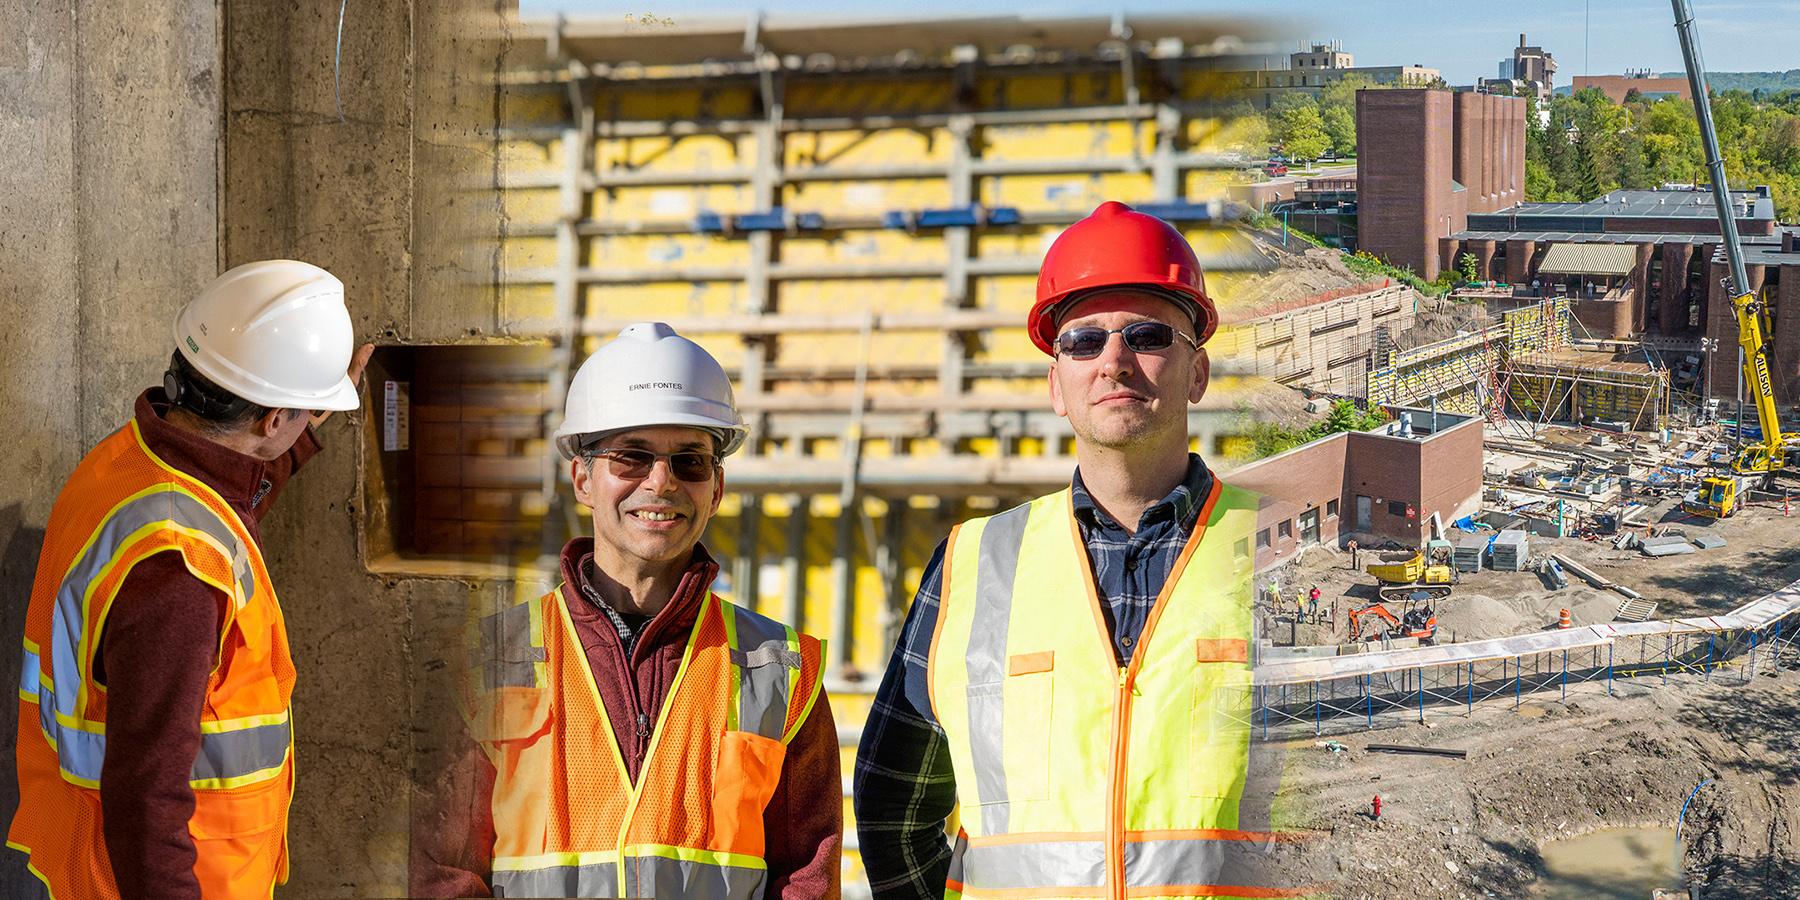 Composite image of people posing and a construction site